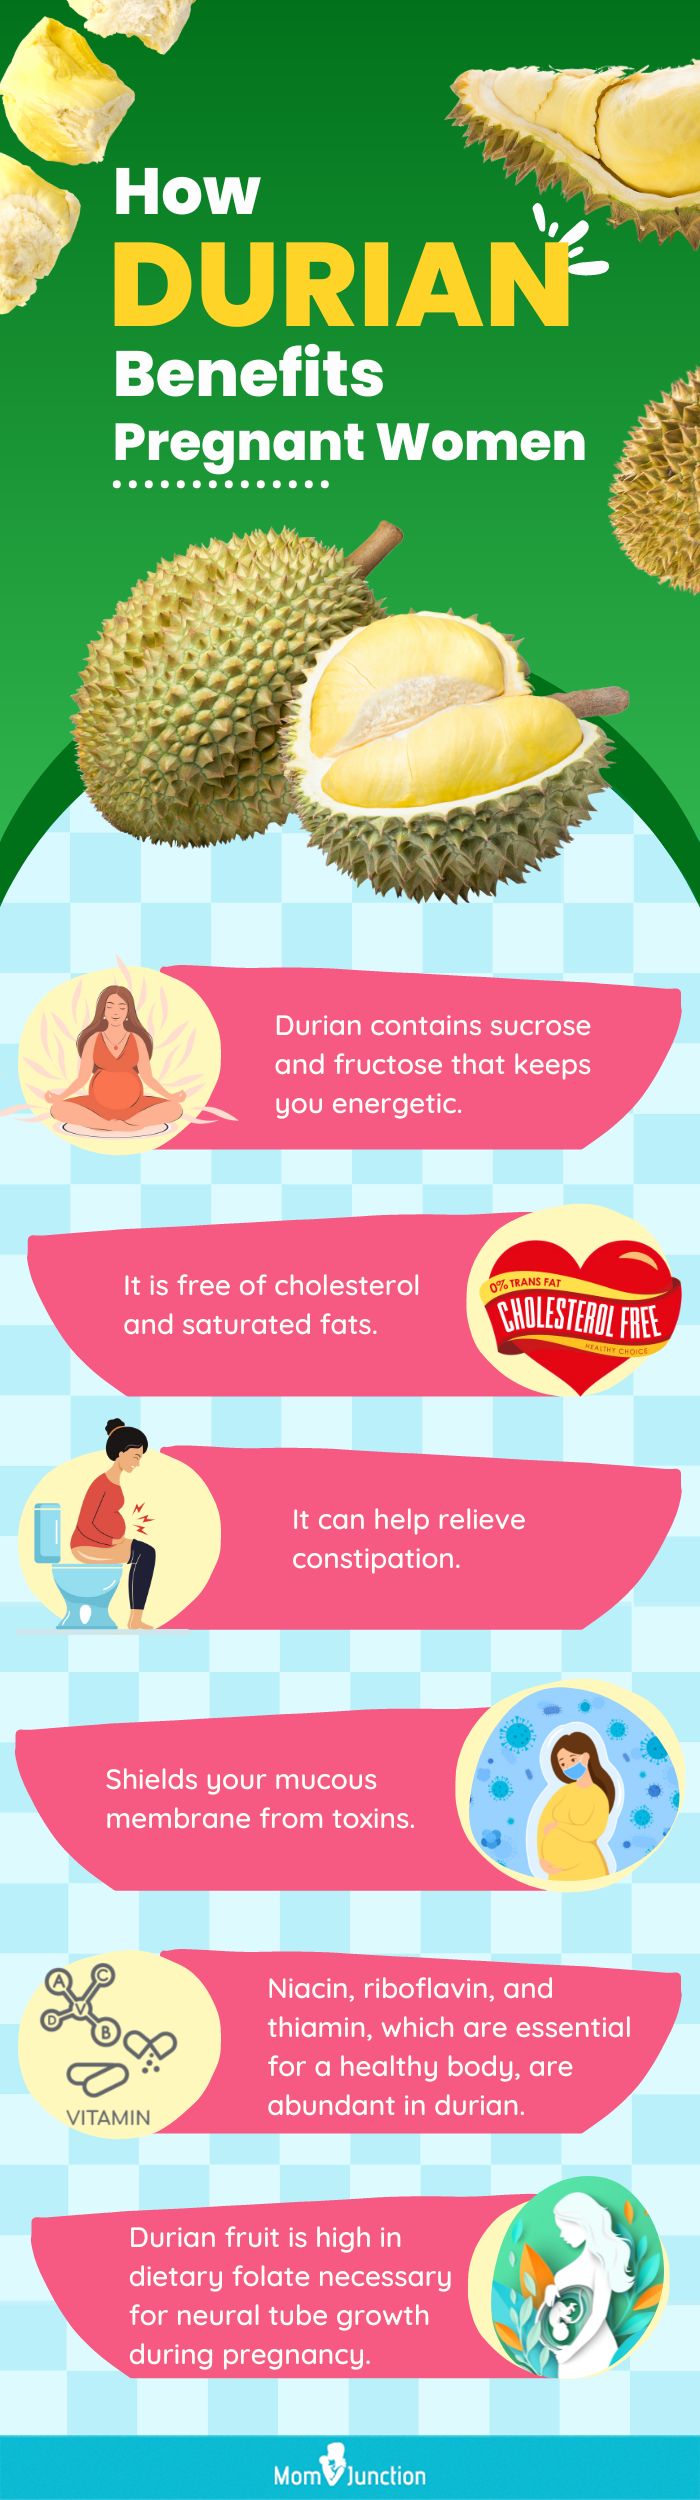 how durian benefits pregnant women (infographic)